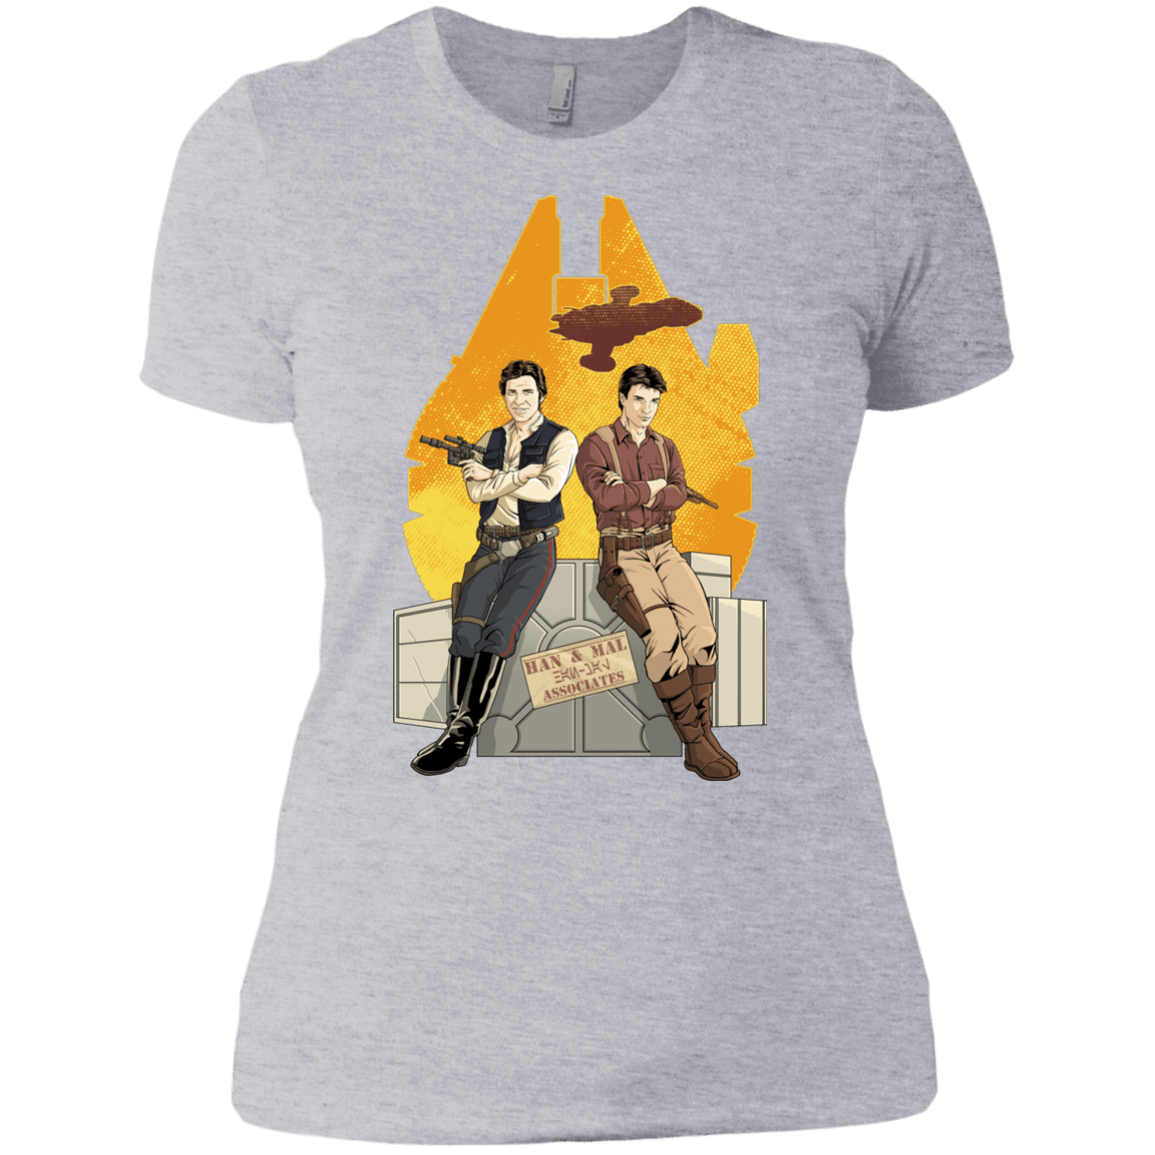 T-Shirts Heather Grey / X-Small Partners In Crime Women's Premium T-Shirt